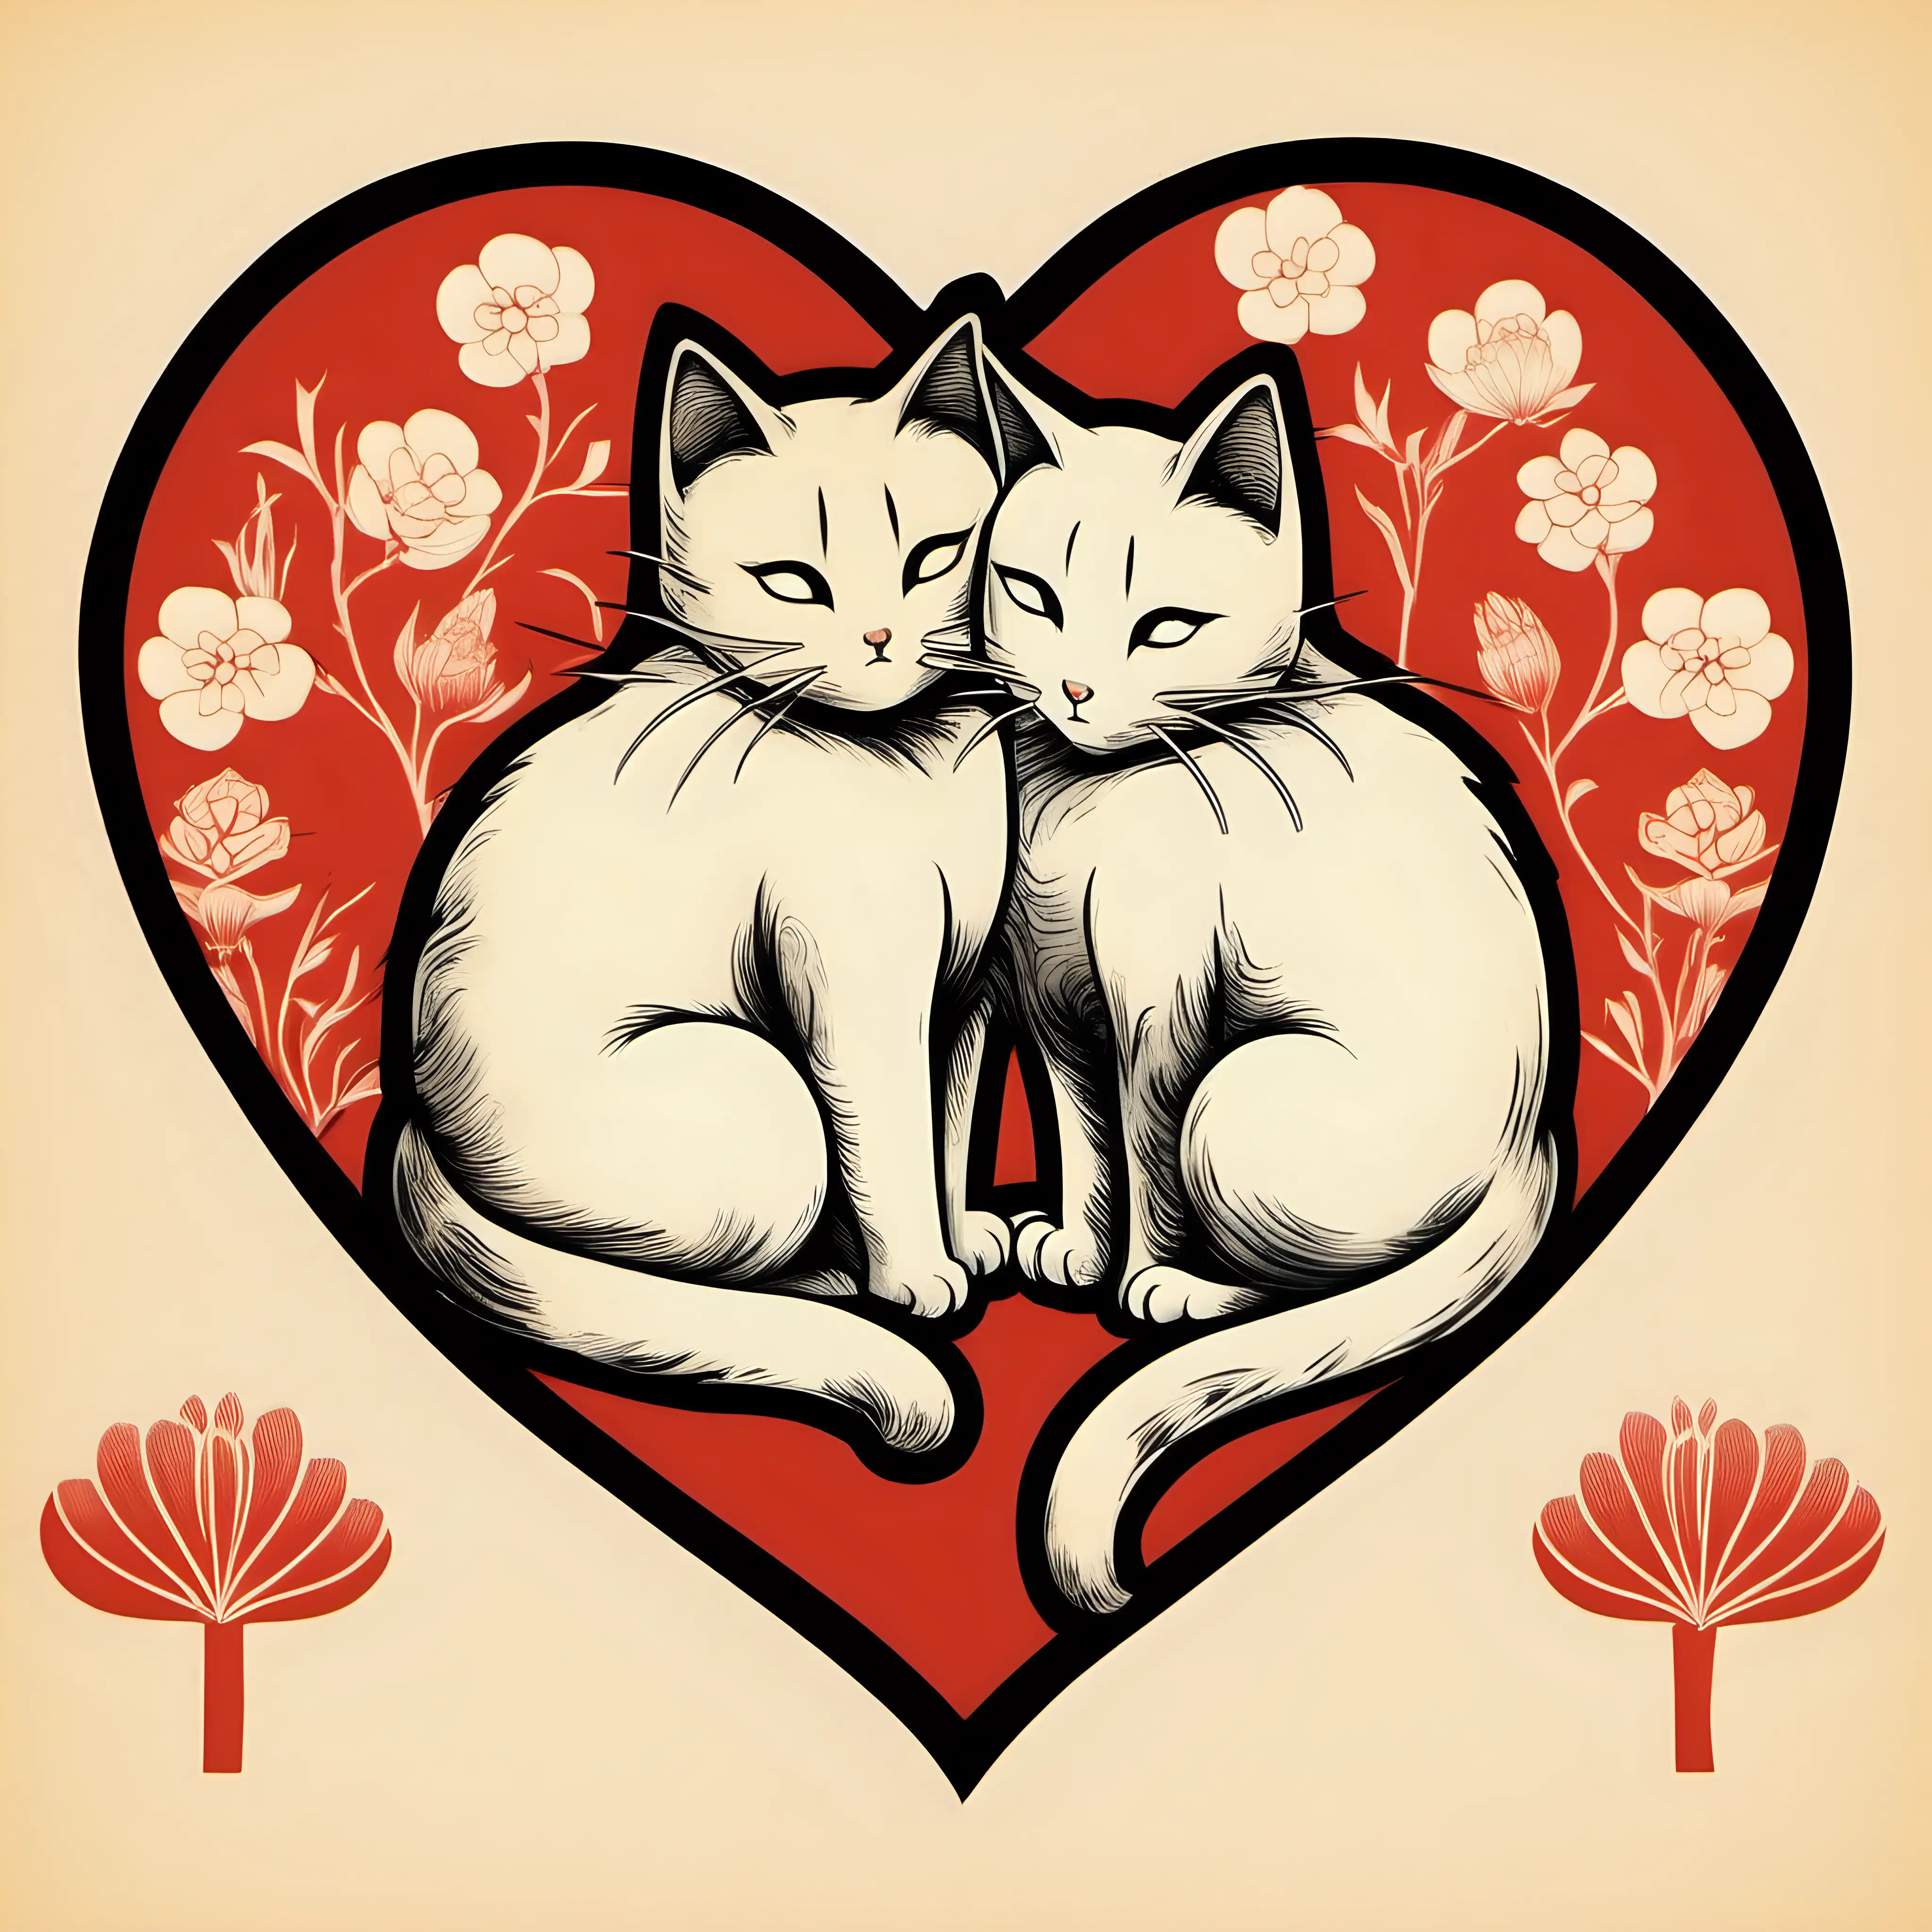 Adorable Japanese RetroStyle Cats Cuddling in Heart Formation